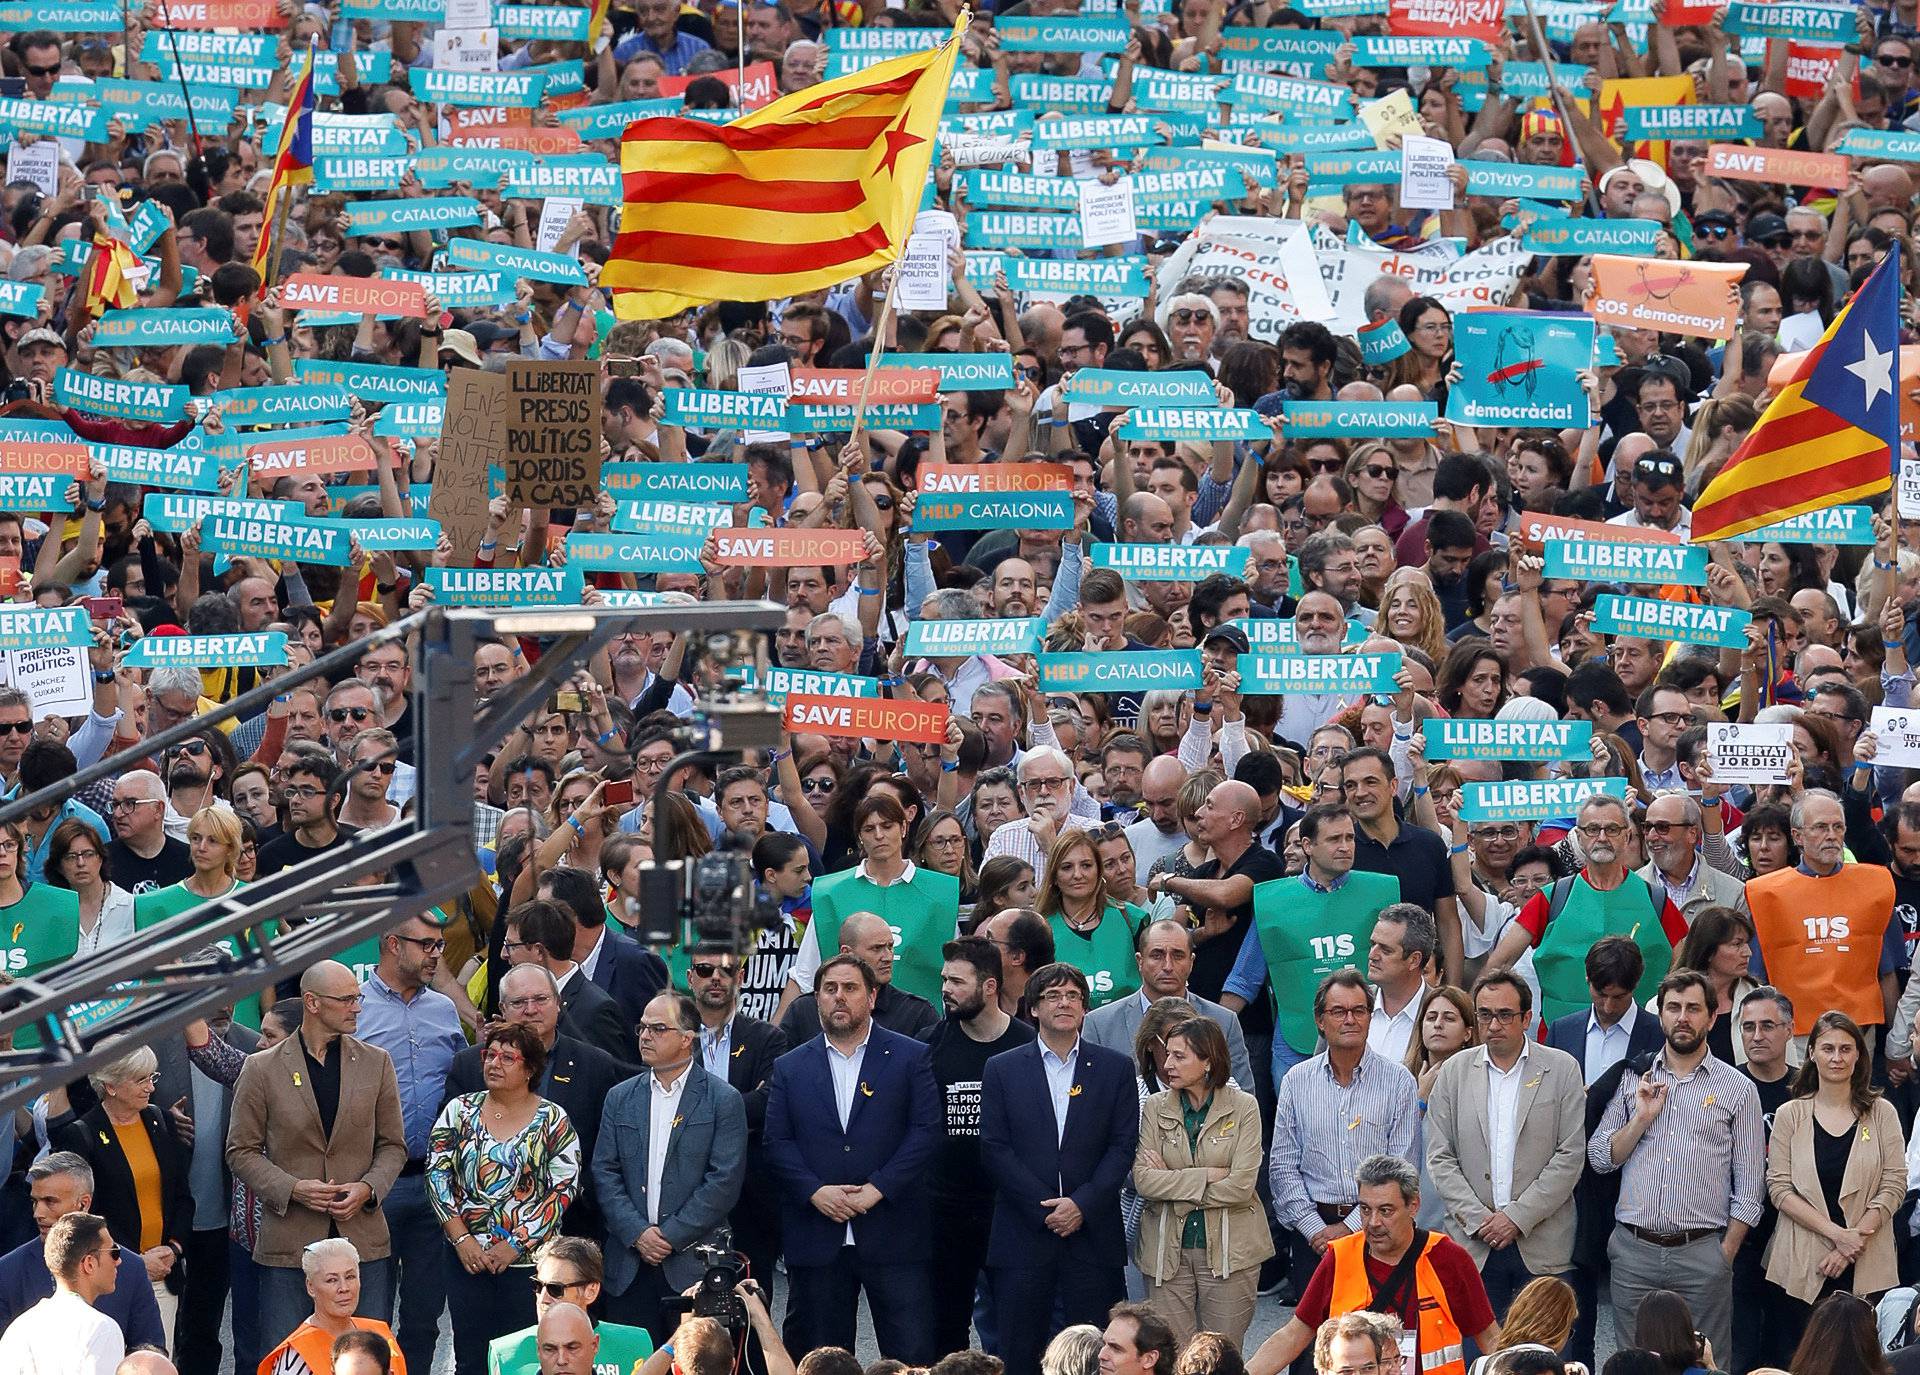 Catalan President Puigdemont and other government members attend a demonstration organised by Catalan pro-independence movements ANC (Catalan National Assembly) and Omnium Cutural, following the imprisonment of their two leaders in Barcelona